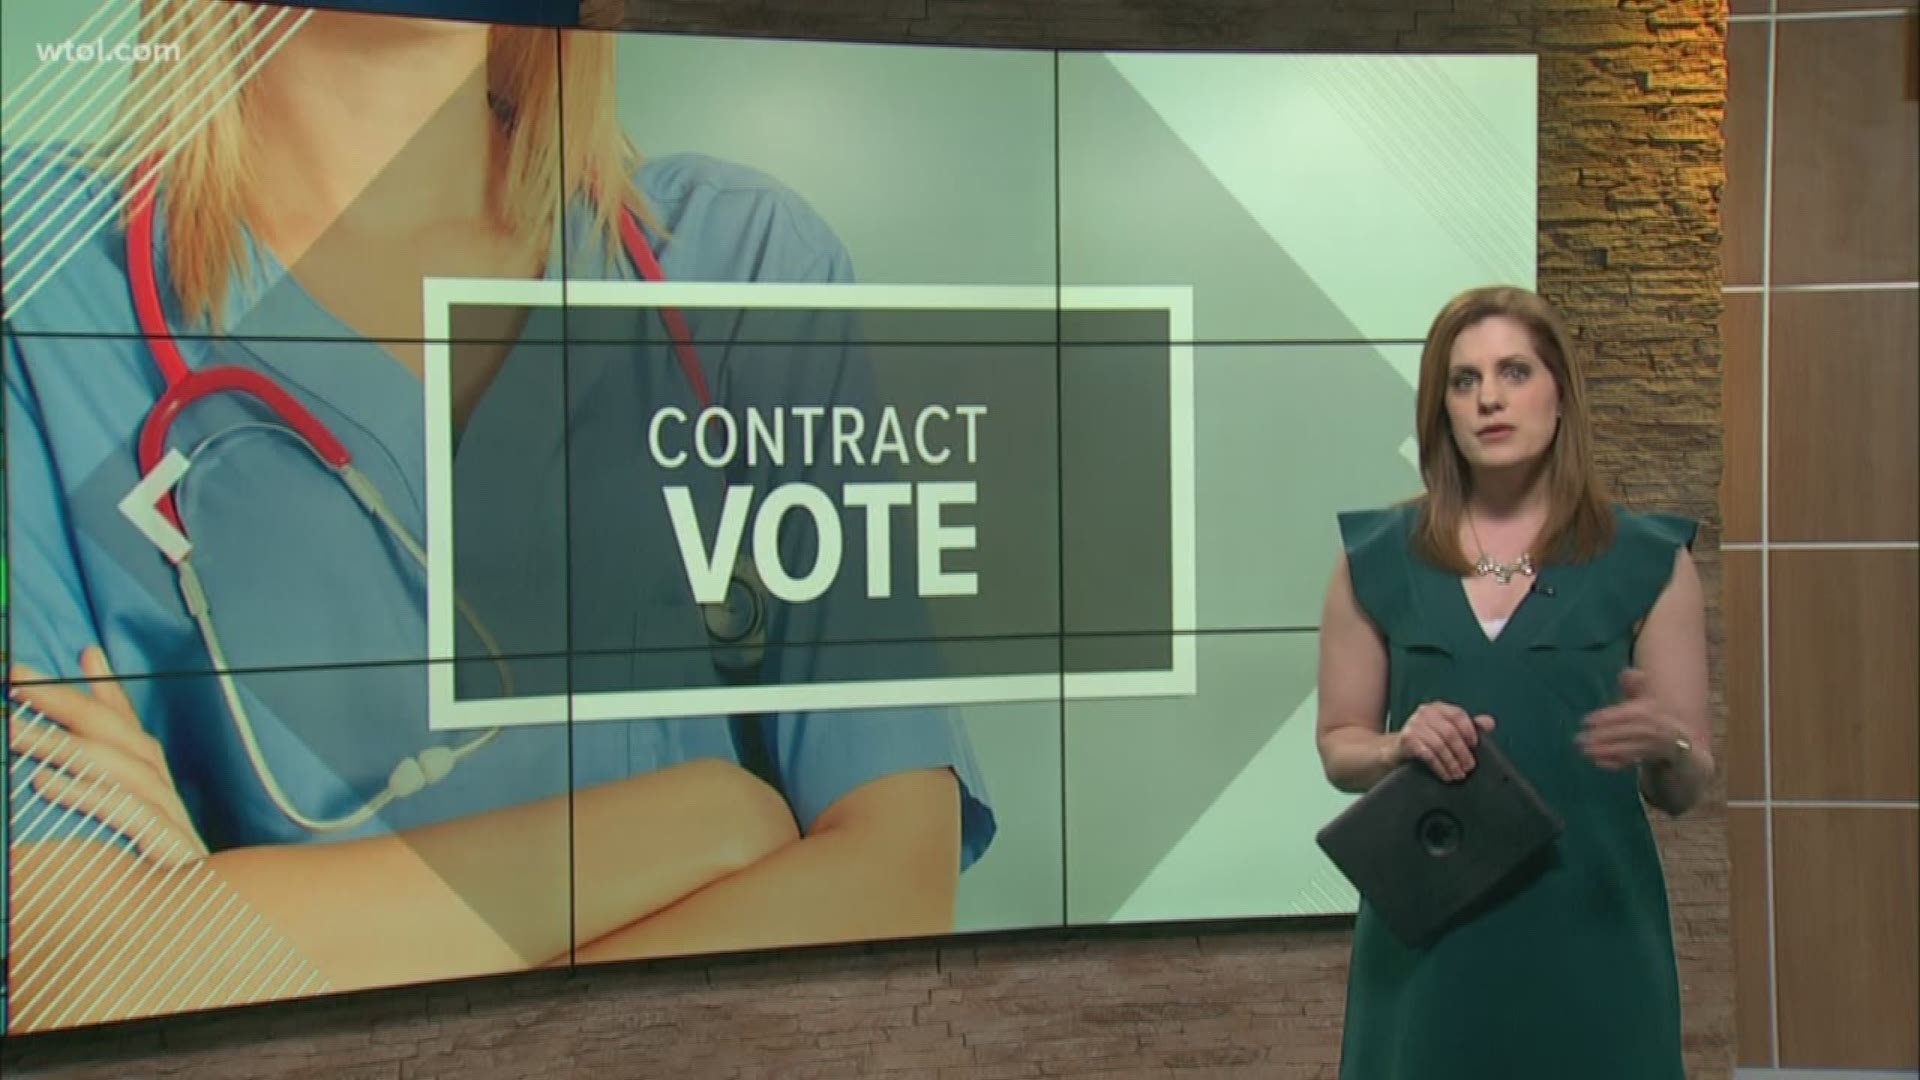 Nurses received contract details over the weekend, and contract voting was taking place Monday and Tuesday